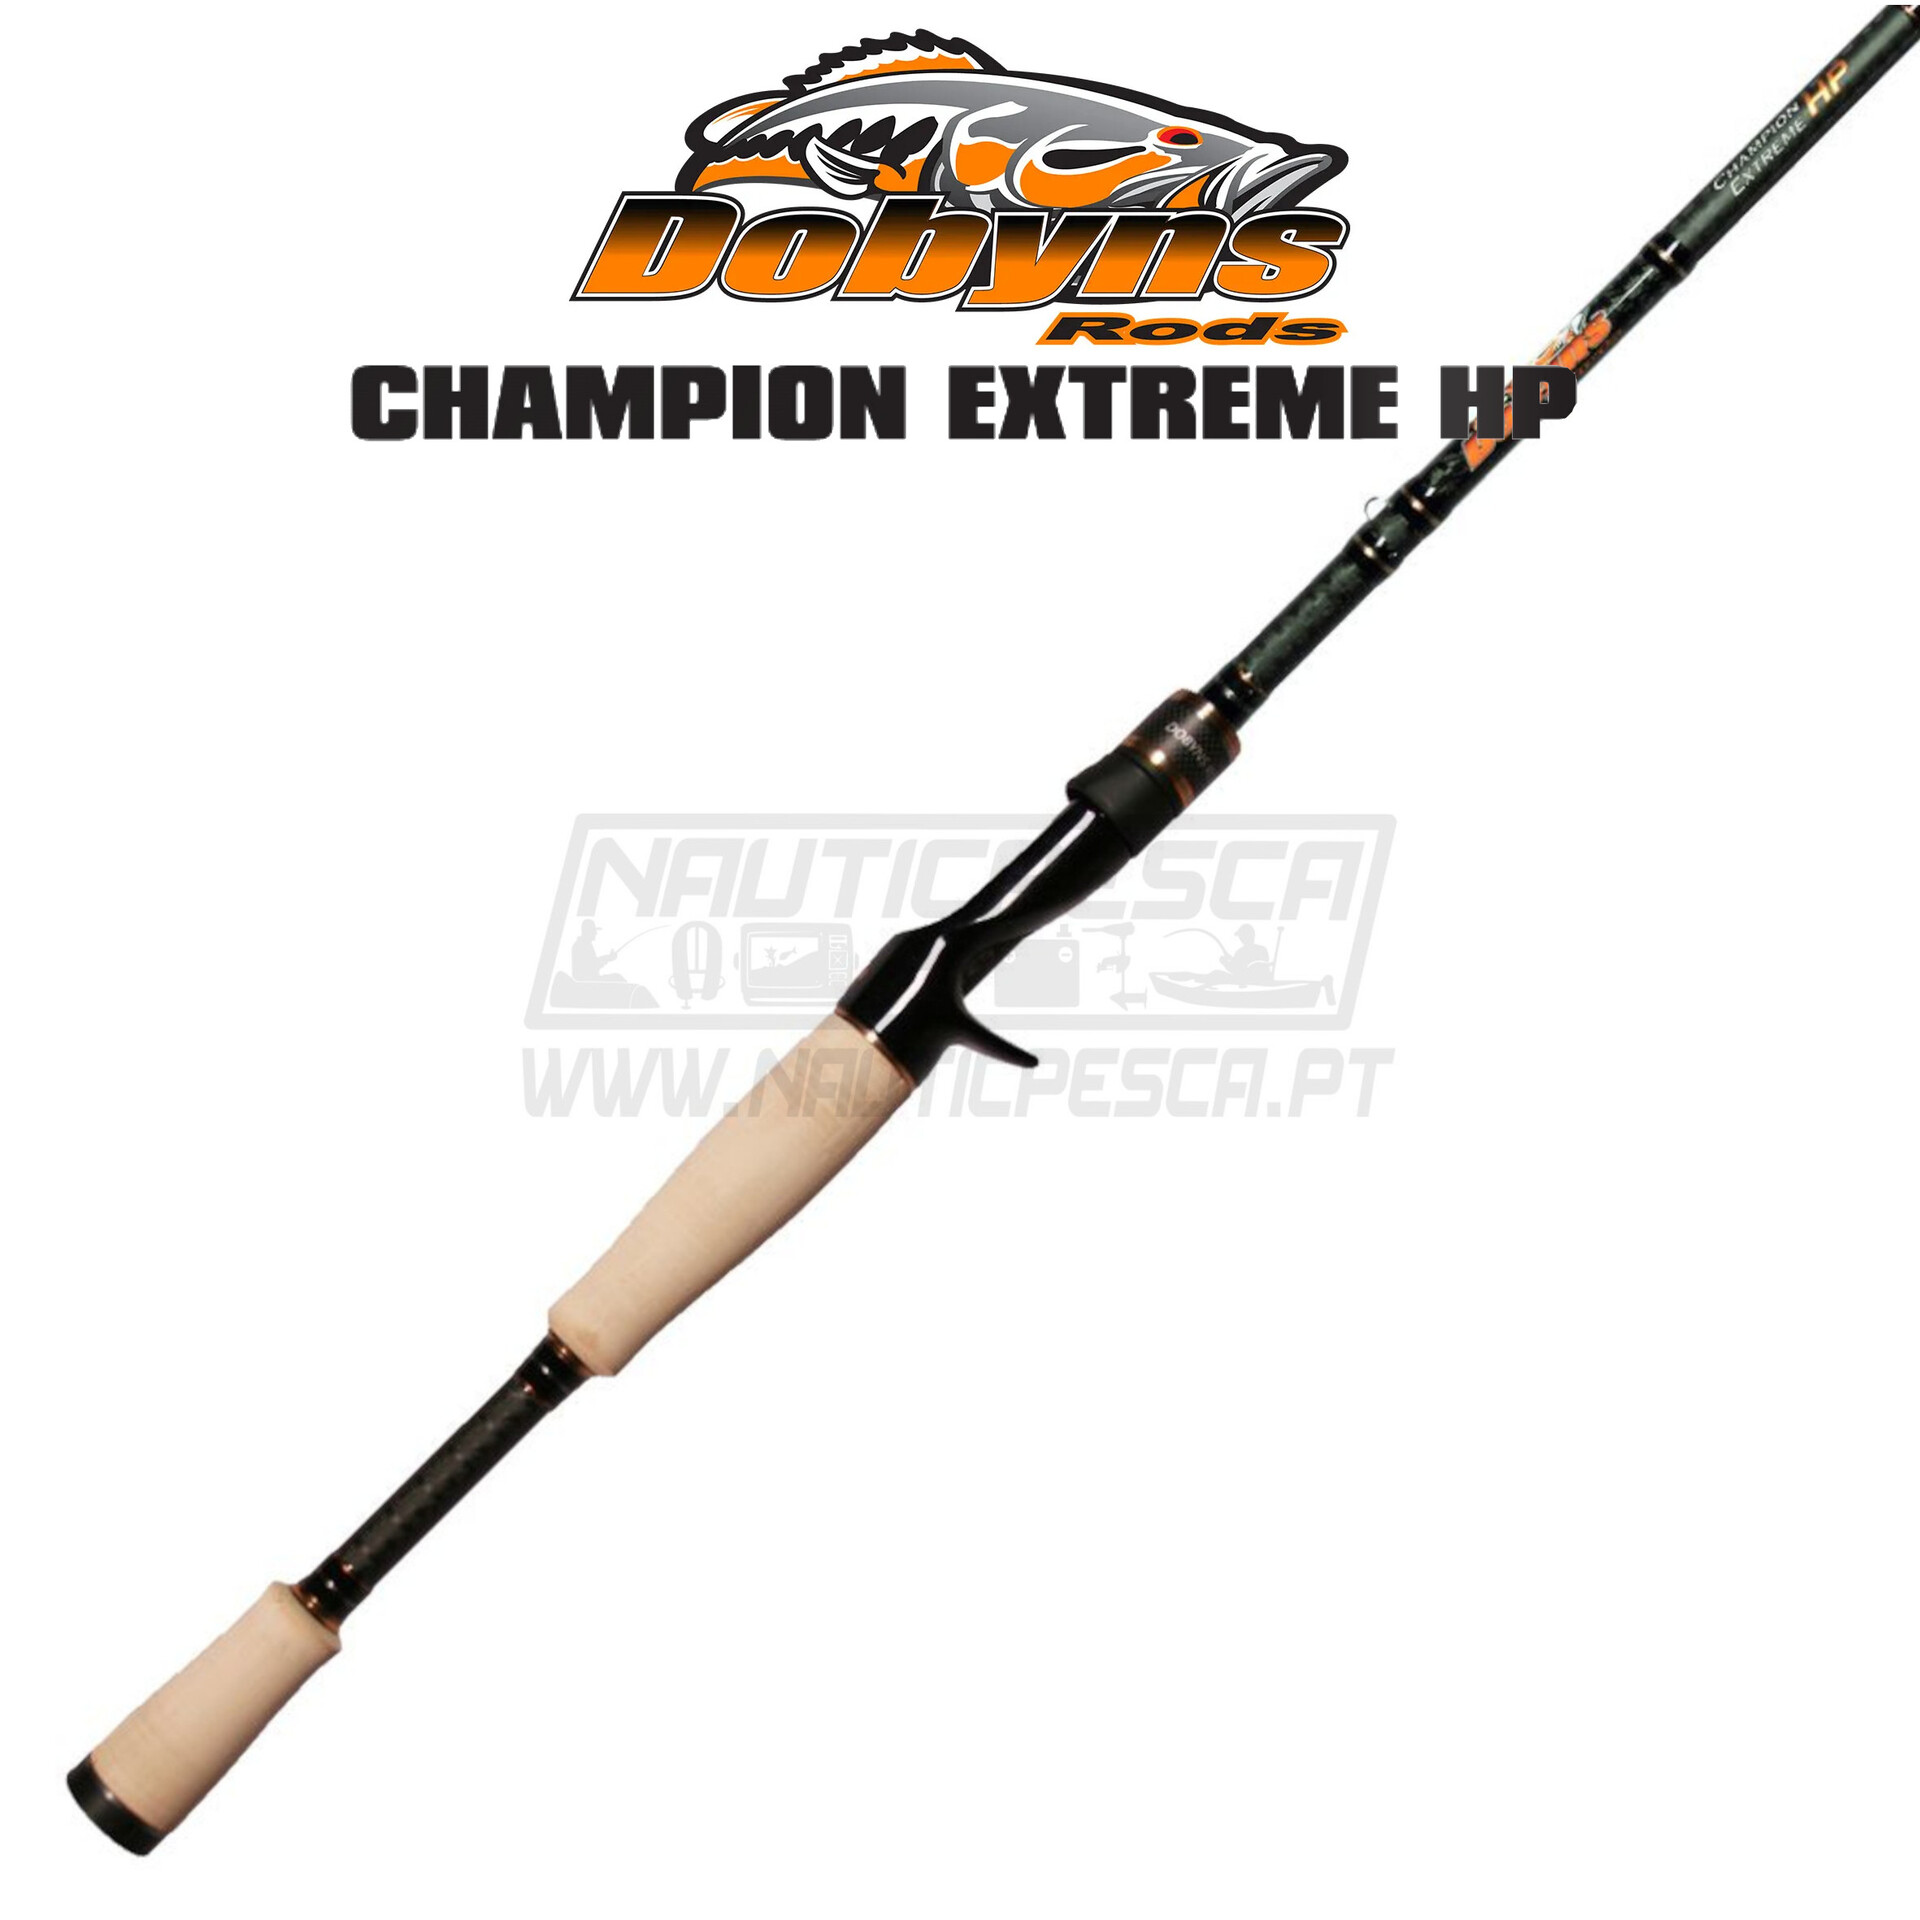  Dobyns Rods Champion Extreme HP Series 7'4” Casting